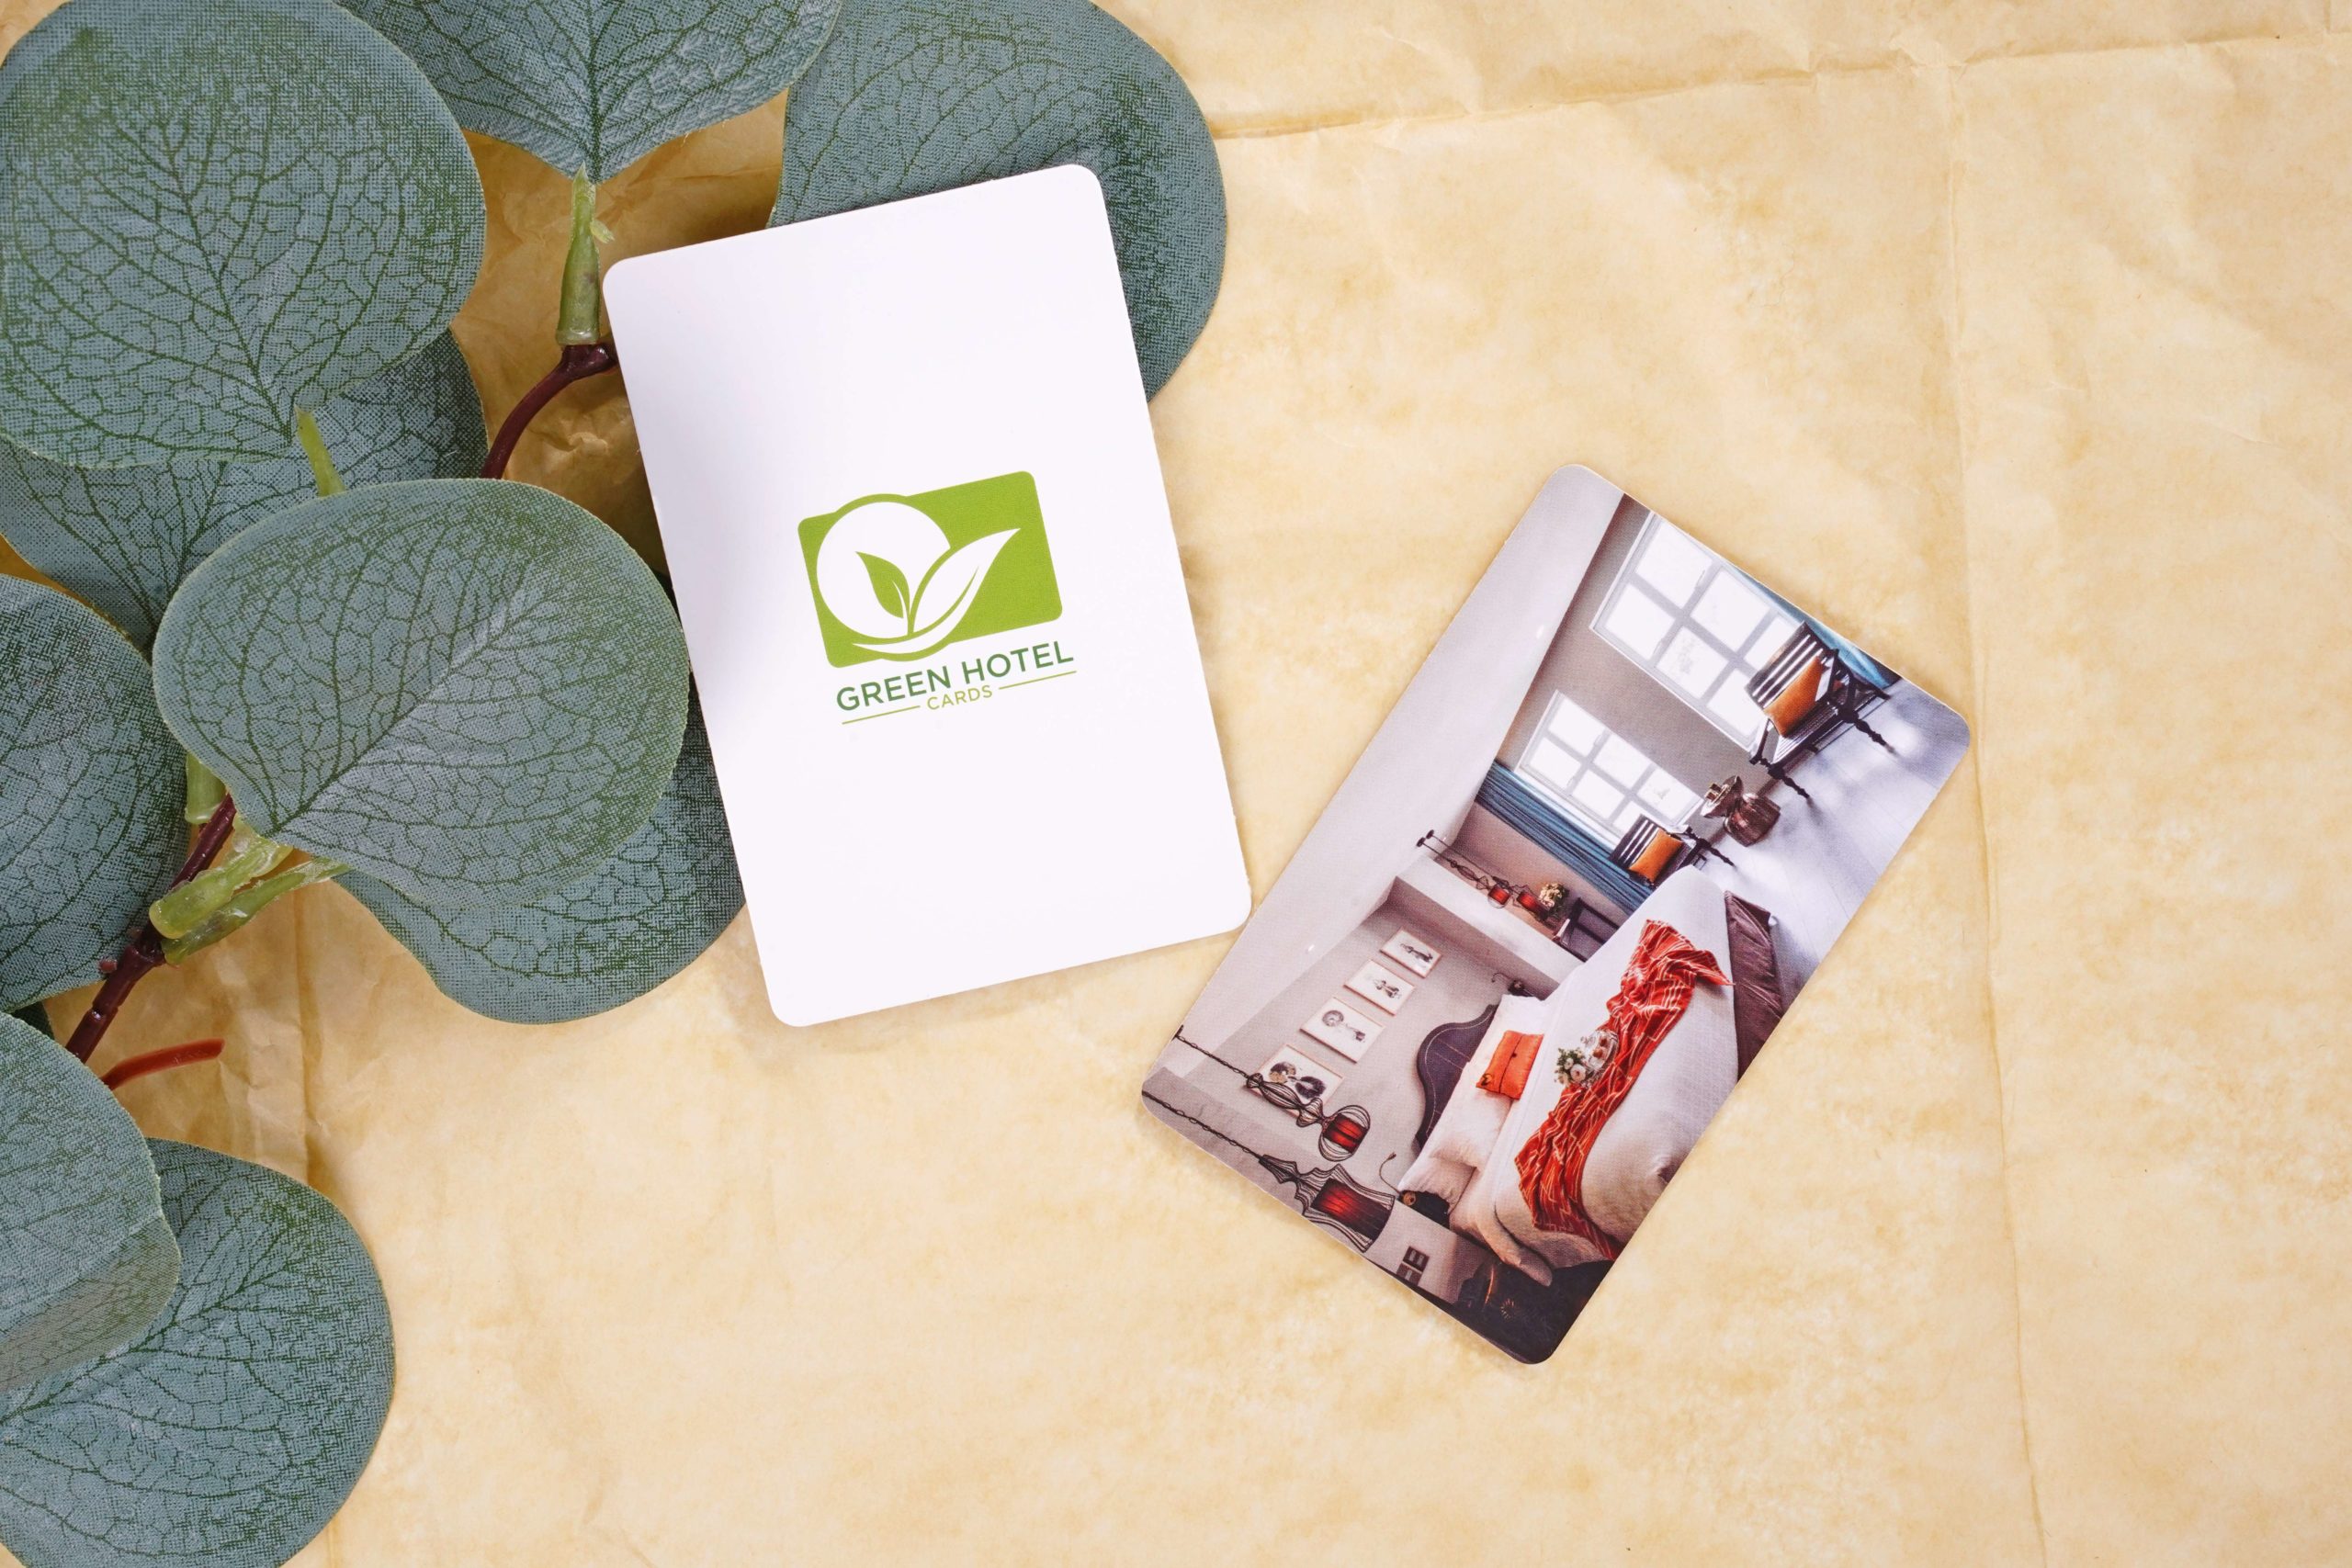 Green Hotel Cards Delivering Costeffective and Environmentally